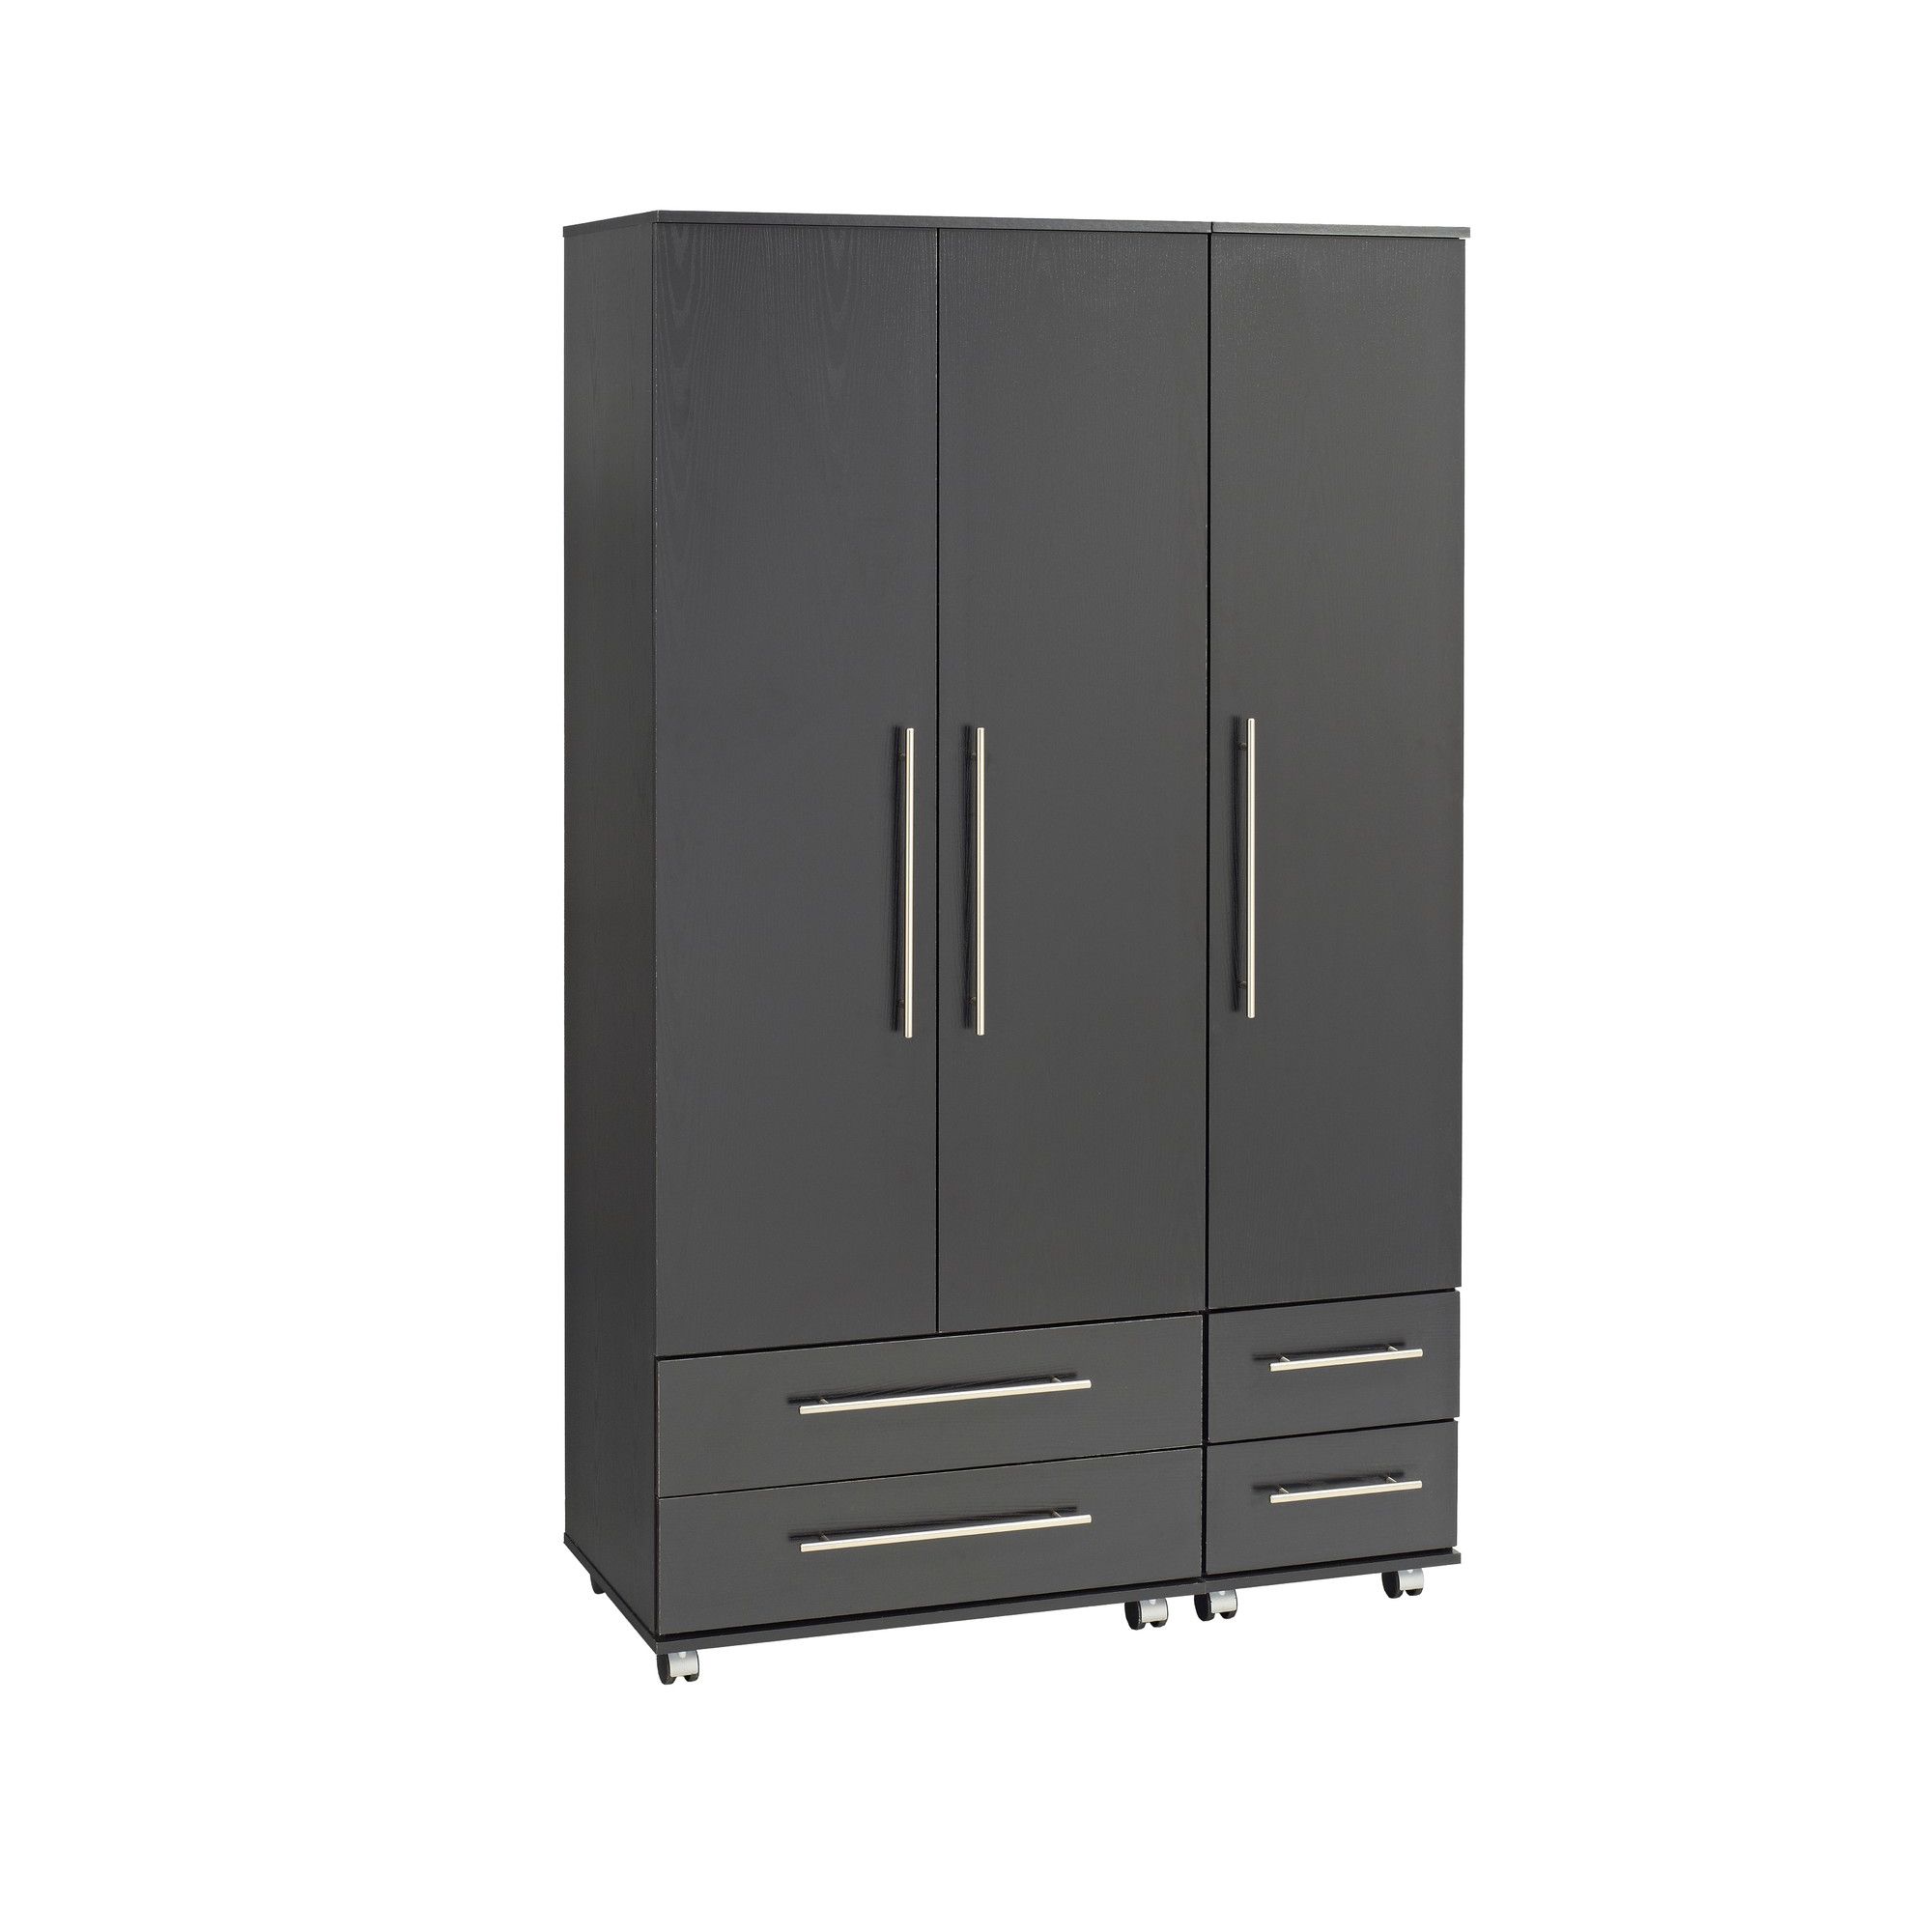 Ideal Furniture Bobby Triple Wardrobe with Four Drawers - Black at Tesco Direct